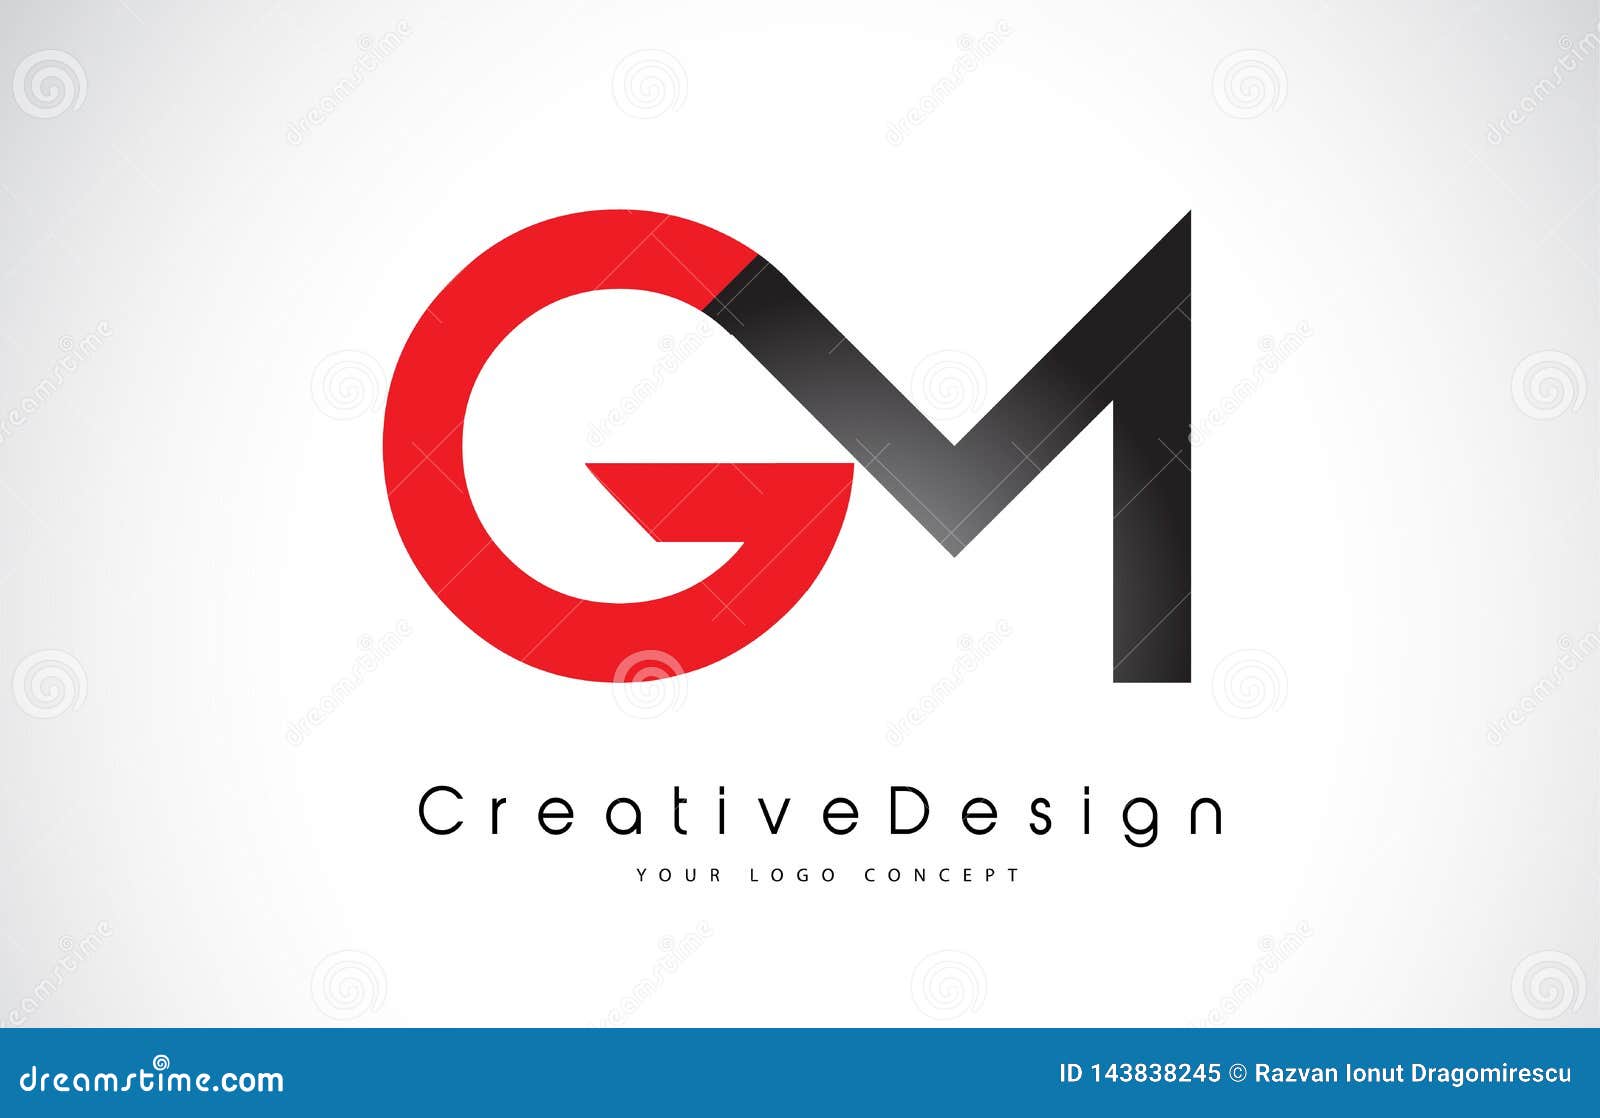 Gm Logo PNG Images, Gm Logo Clipart Free Download